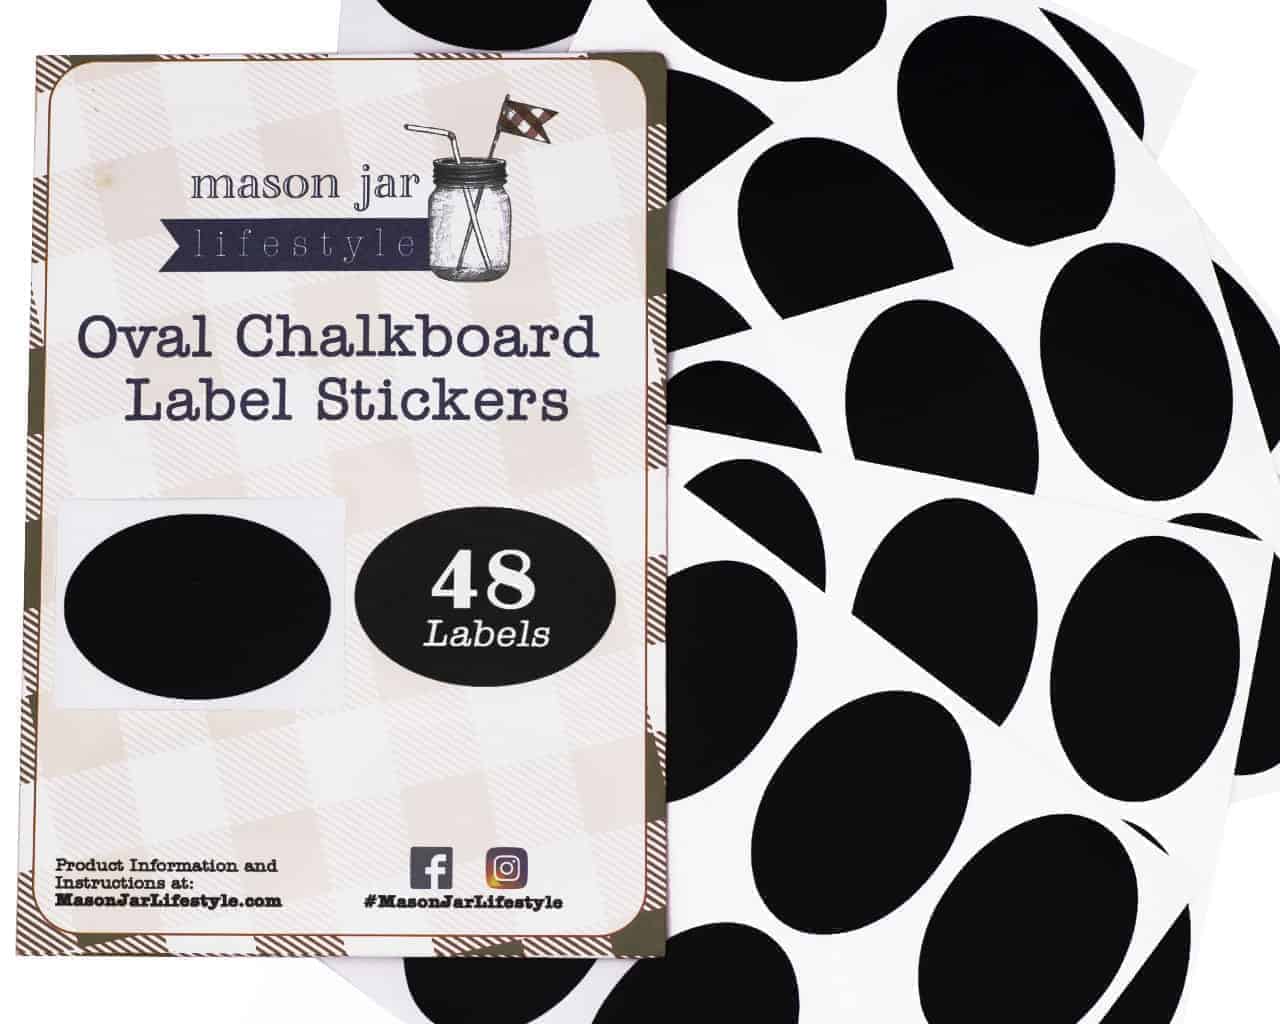 Vinyl Sticker Labels - Small Medium Large Chalkboard Labels with